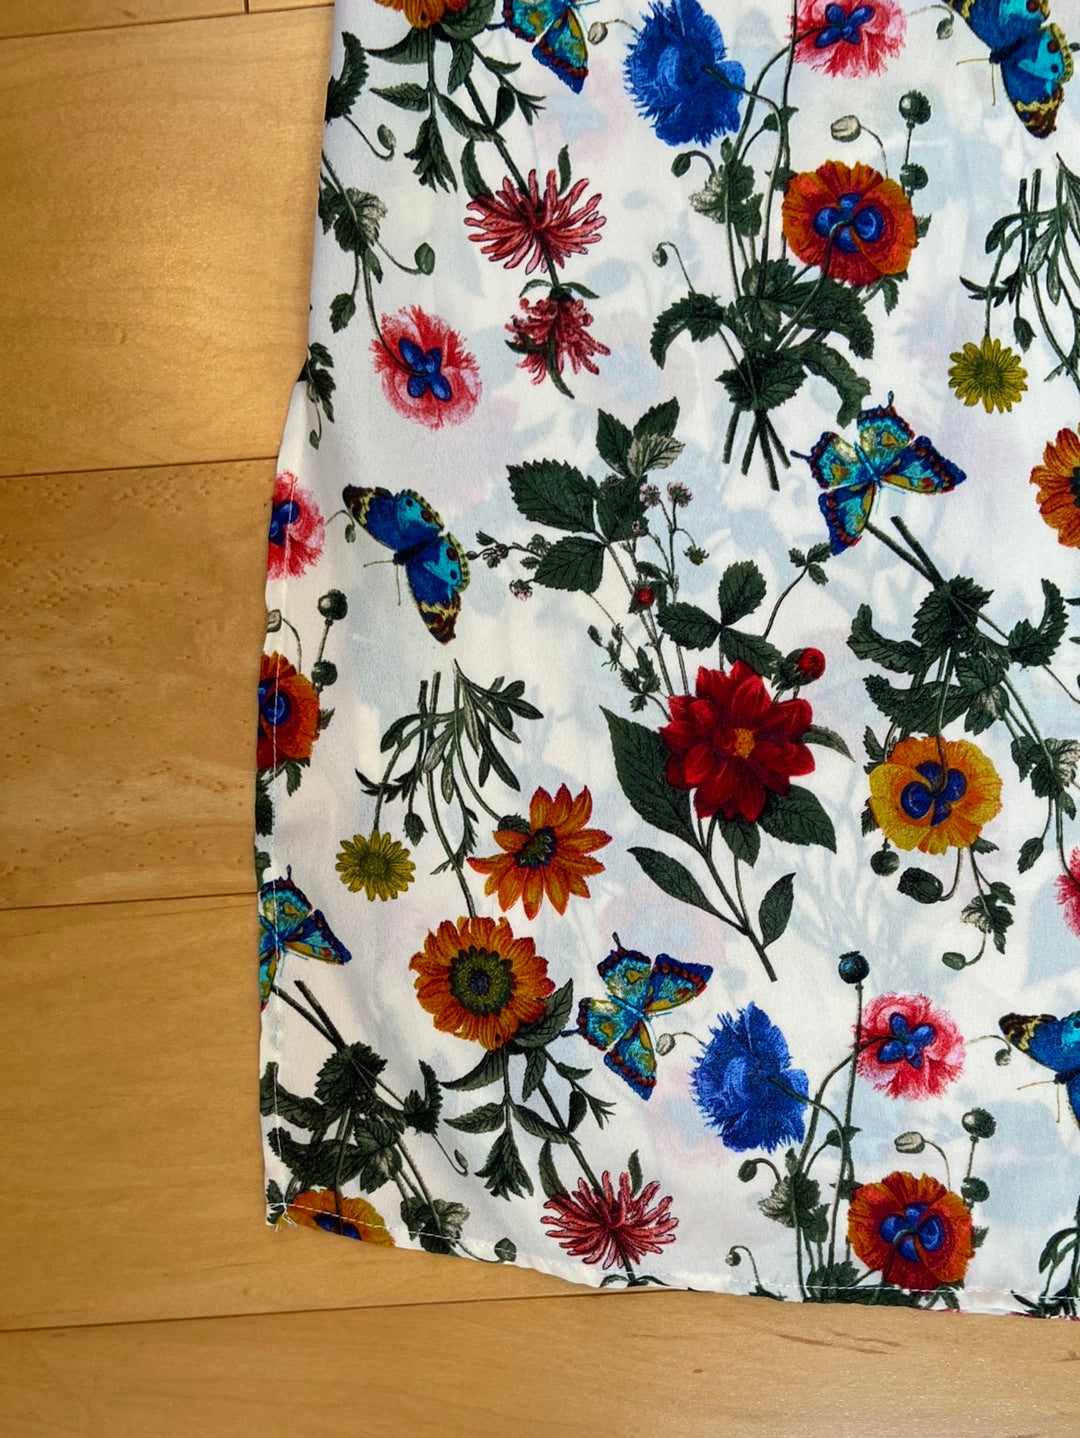 FLORAL FROCK Joompy Size M